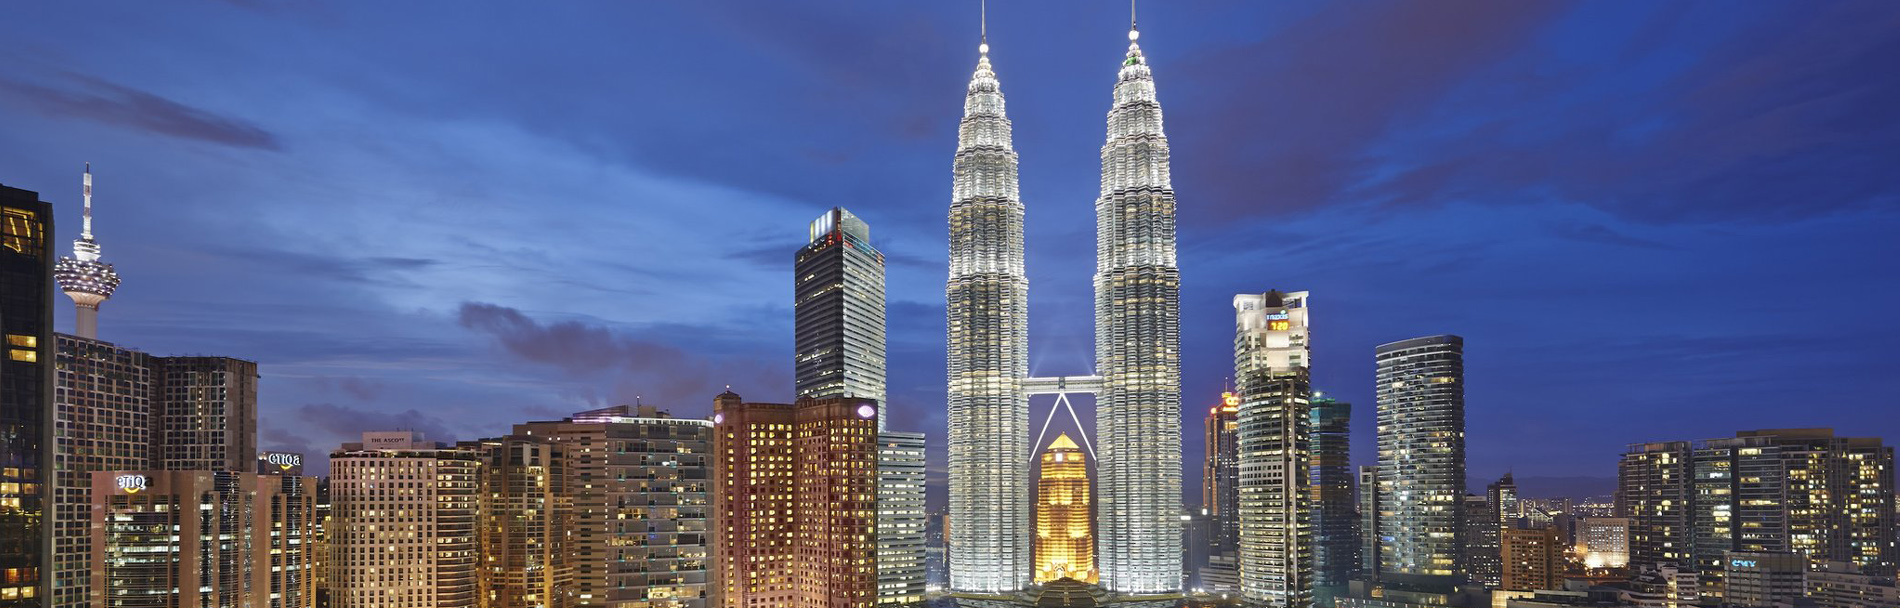 Malaysia Tour Package - 5 Nights